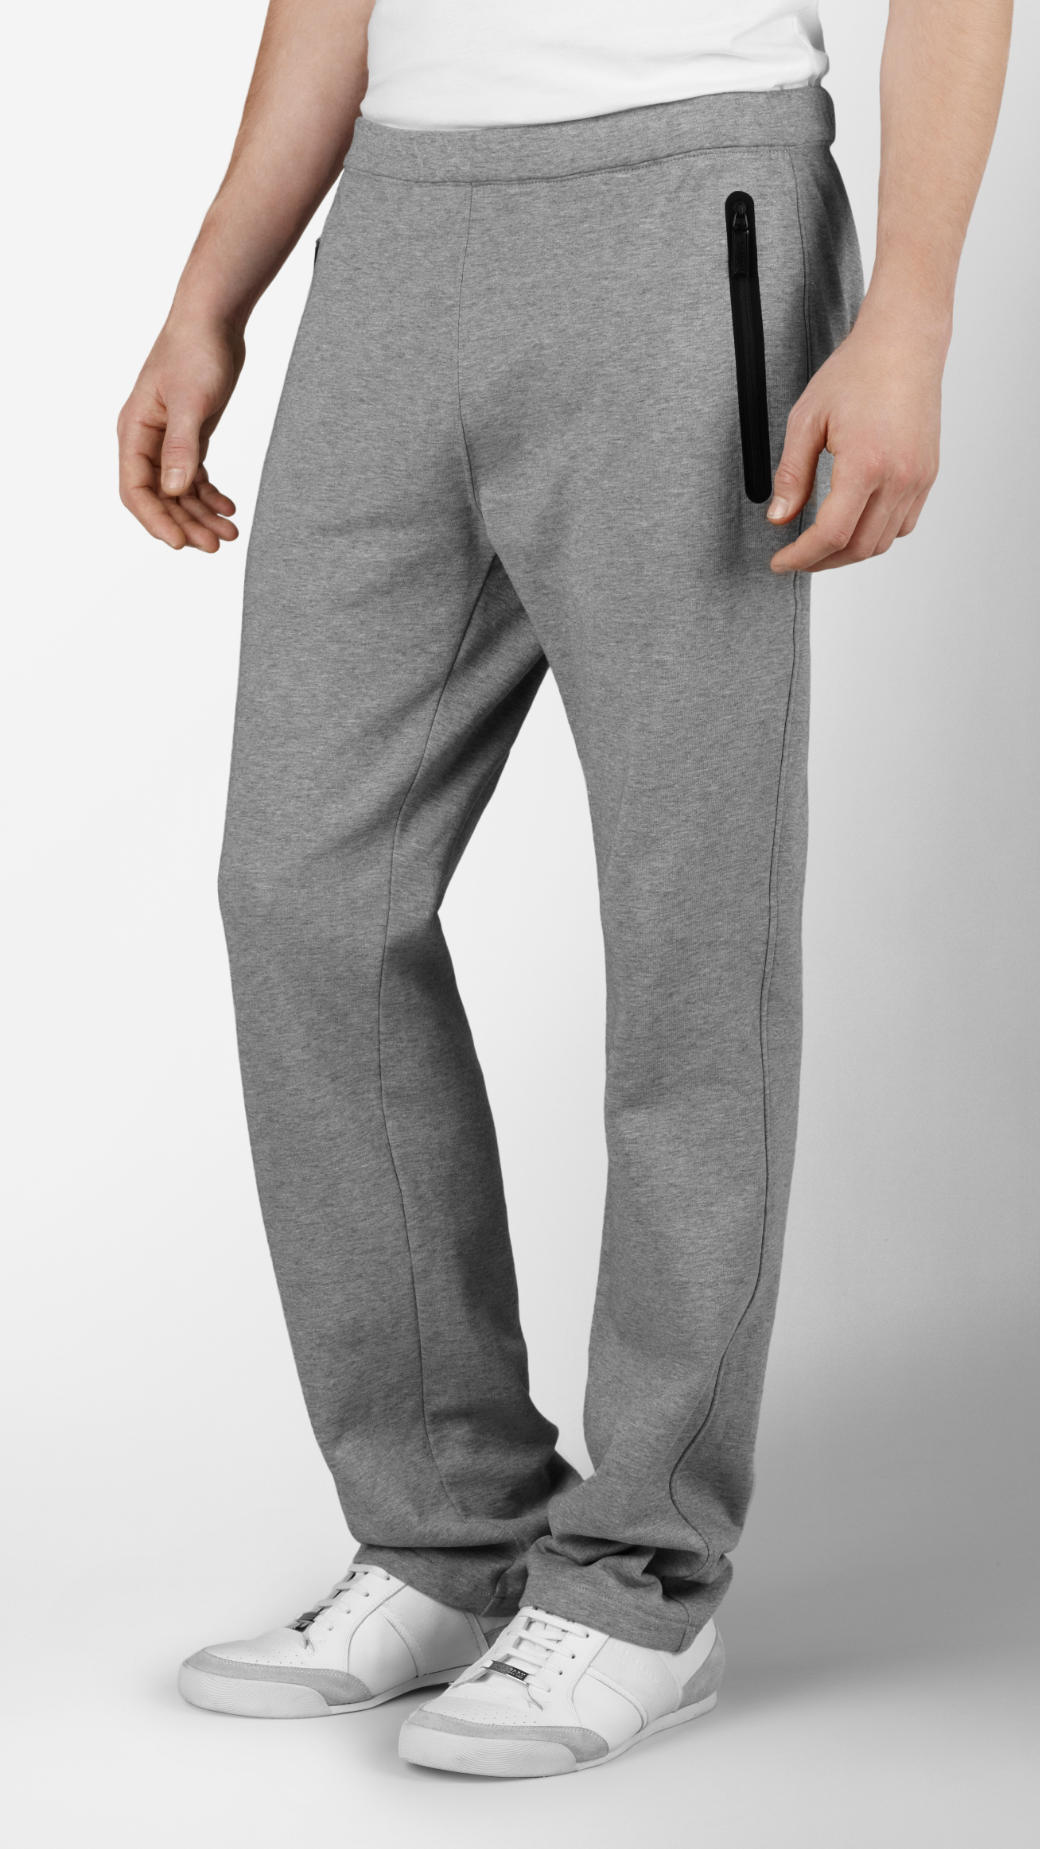 Lyst - Burberry Sport Cotton Running Trousers in Gray for Men